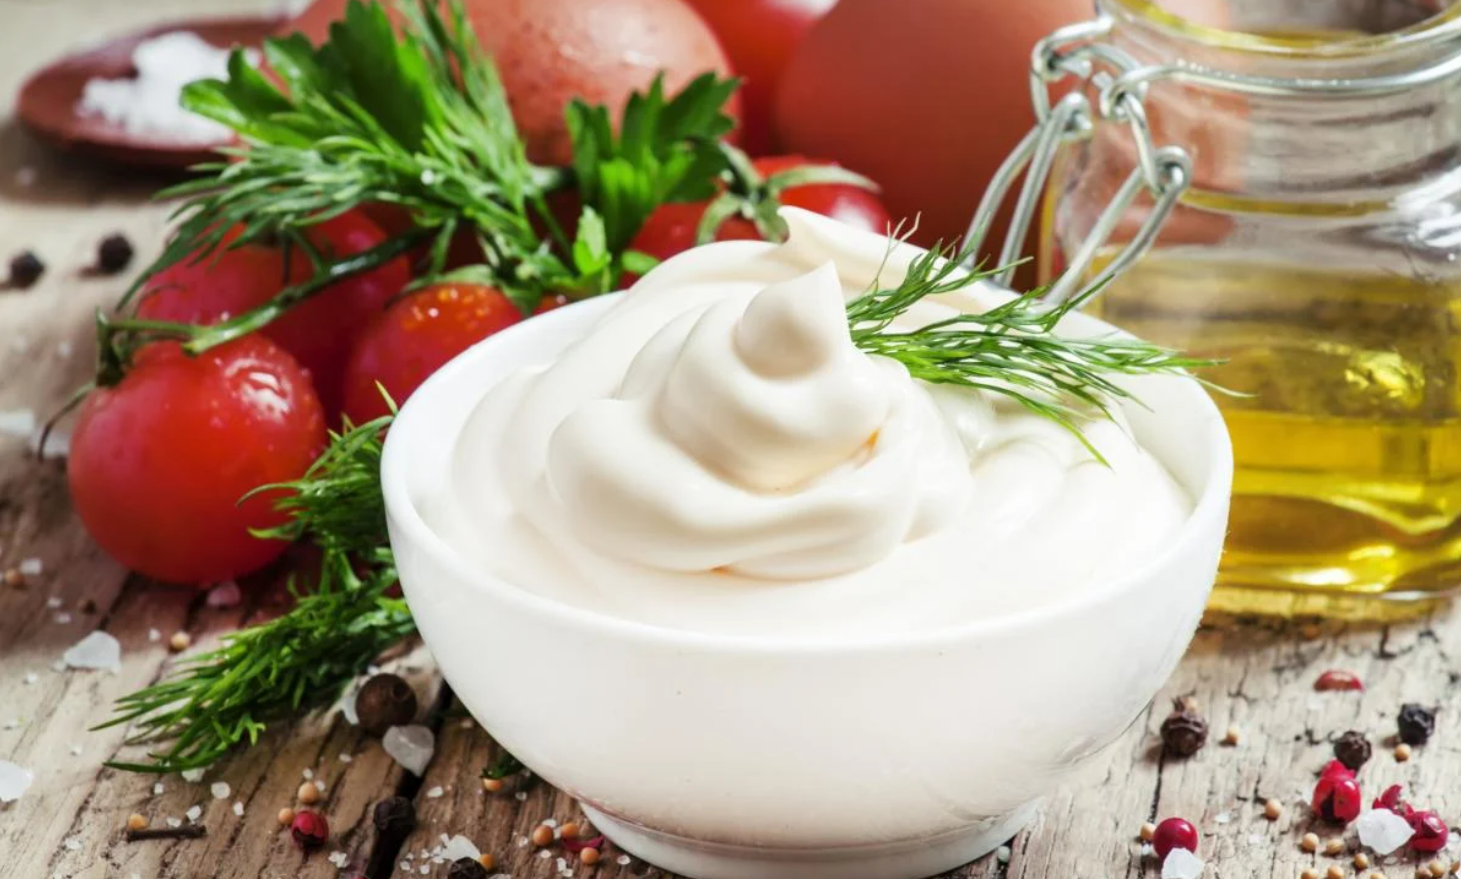 How to make healthy homemade mayonnaise in 2 minutes